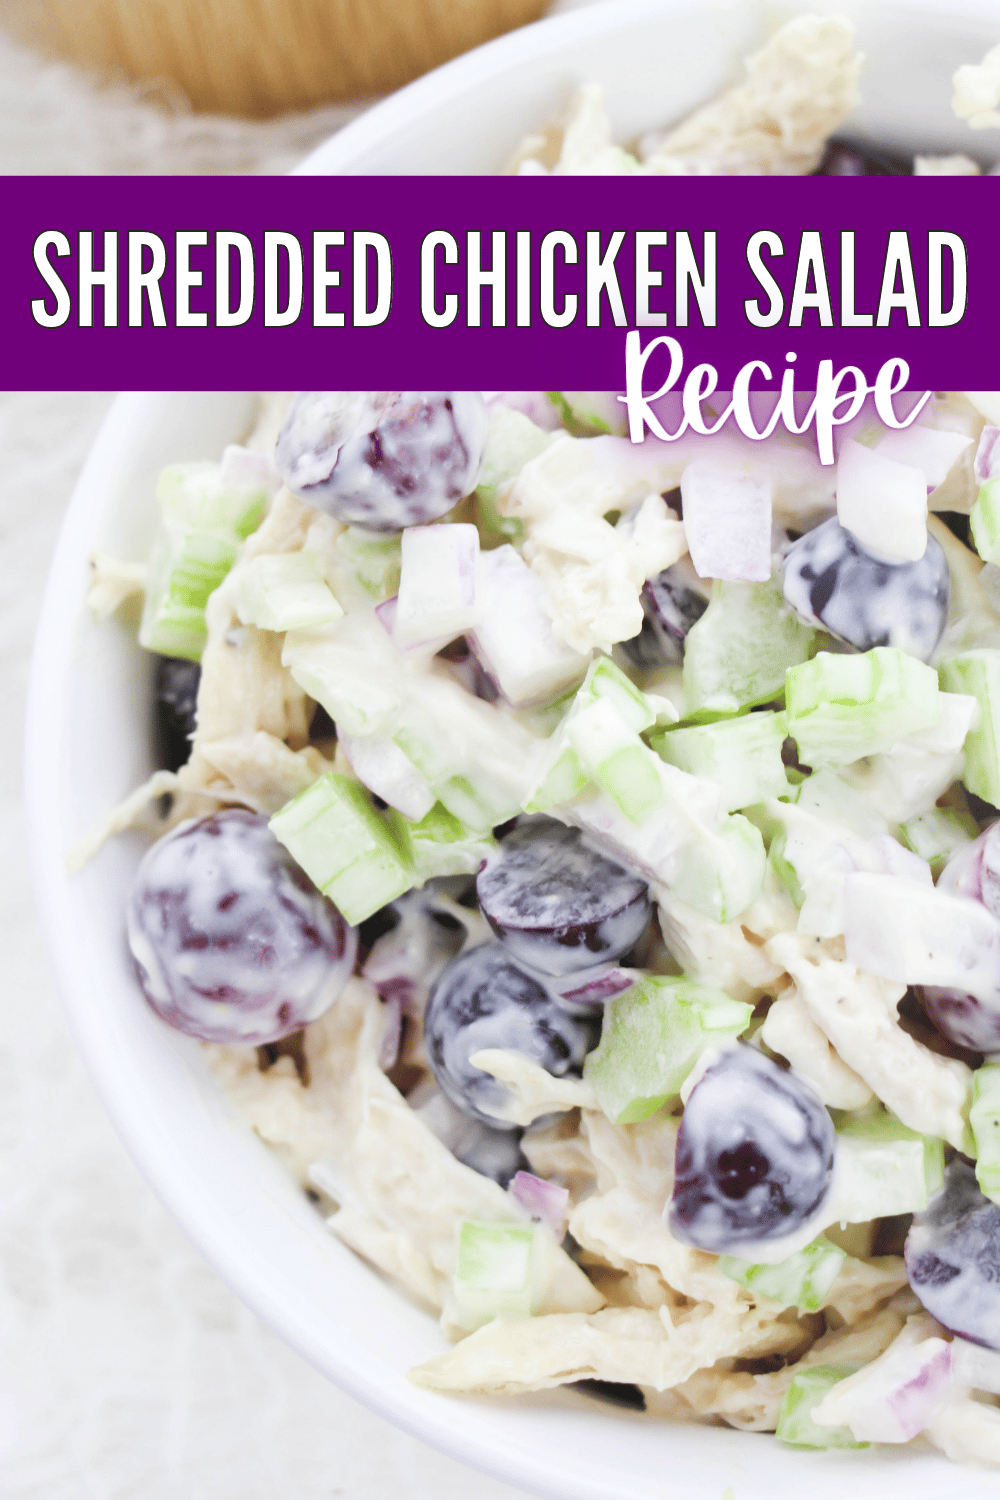 This Shredded Chicken Salad Recipe is a great way to enjoy a healthy and delicious lunch. It will become your favorite go-to lunch option. #shreddedchickensaladrecipe #shreddedchickensalad #chickensaladrecipe #chickensalad #lunchrecipe via @wondermomwannab